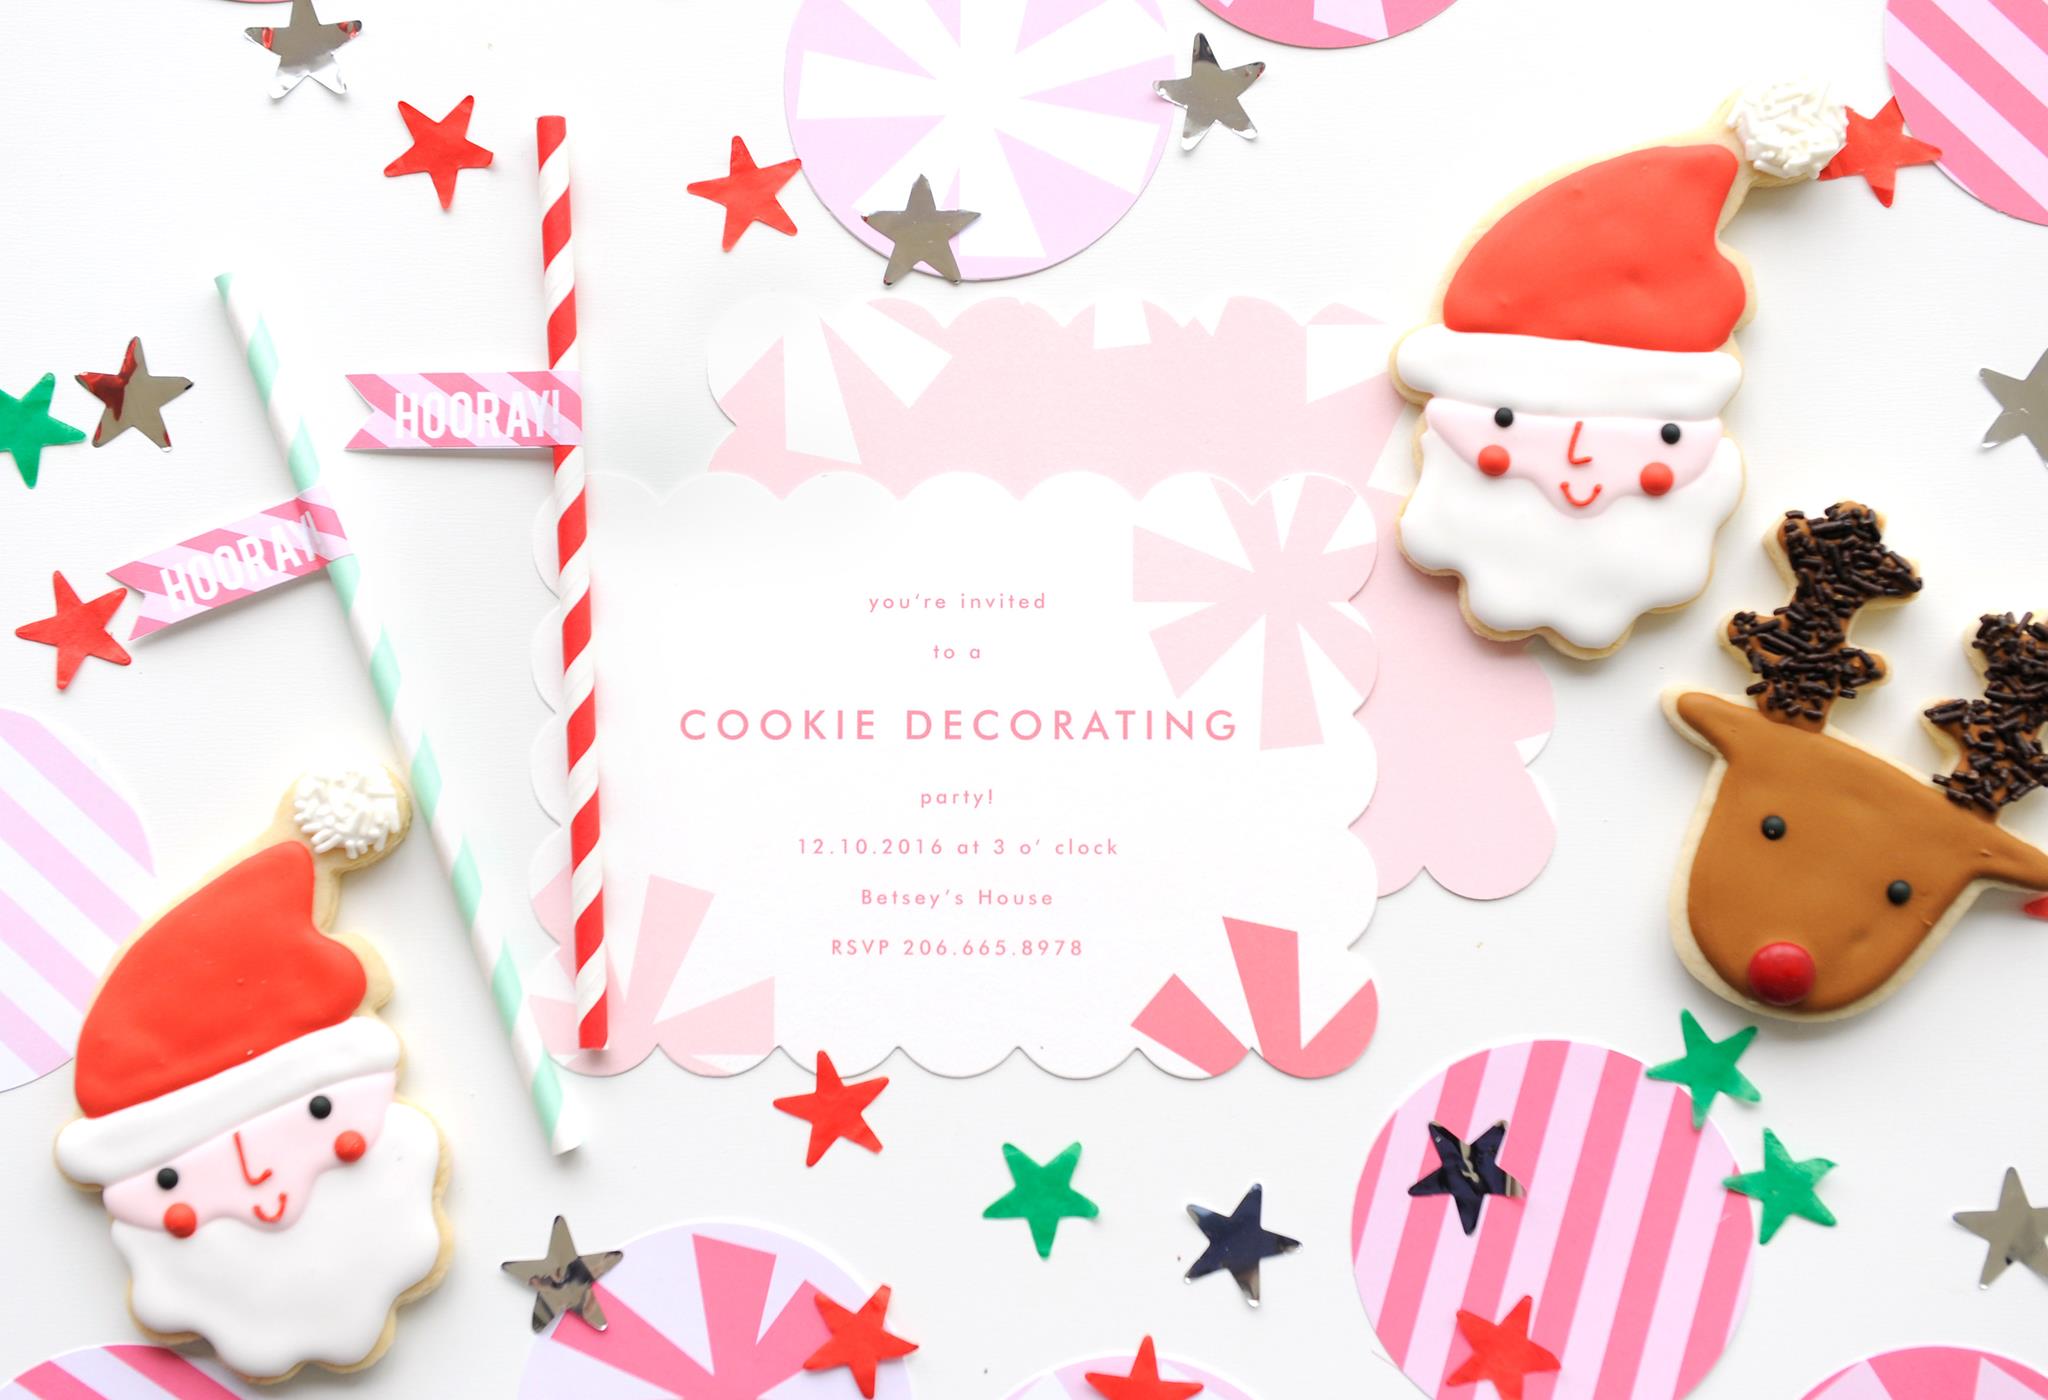 Cookie Decorating Party Invitation